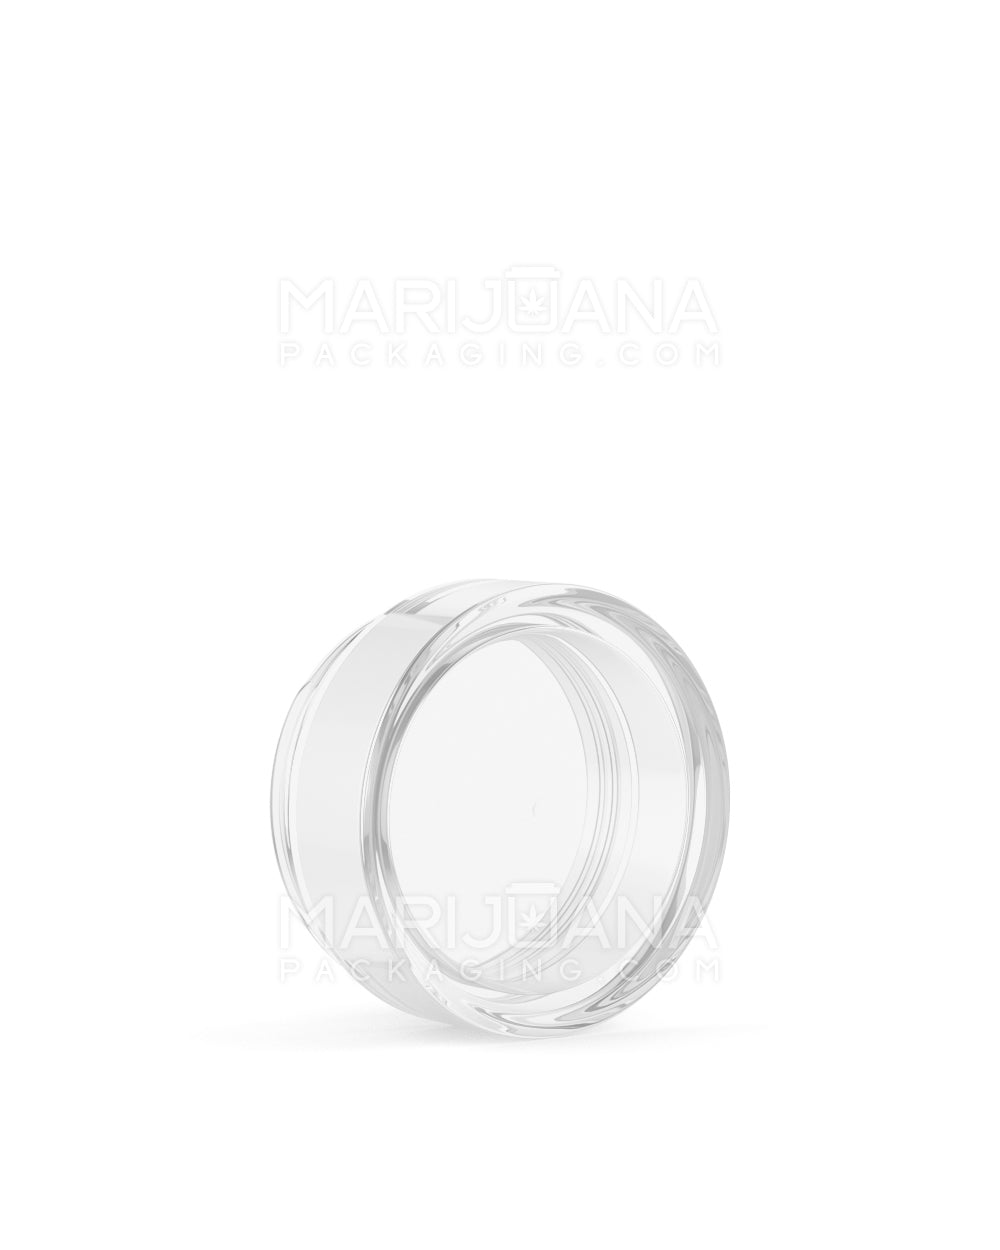 Clear Concentrate Containers w/ Screw Top Cap | 10mL - Plastic - 100 Count - 7